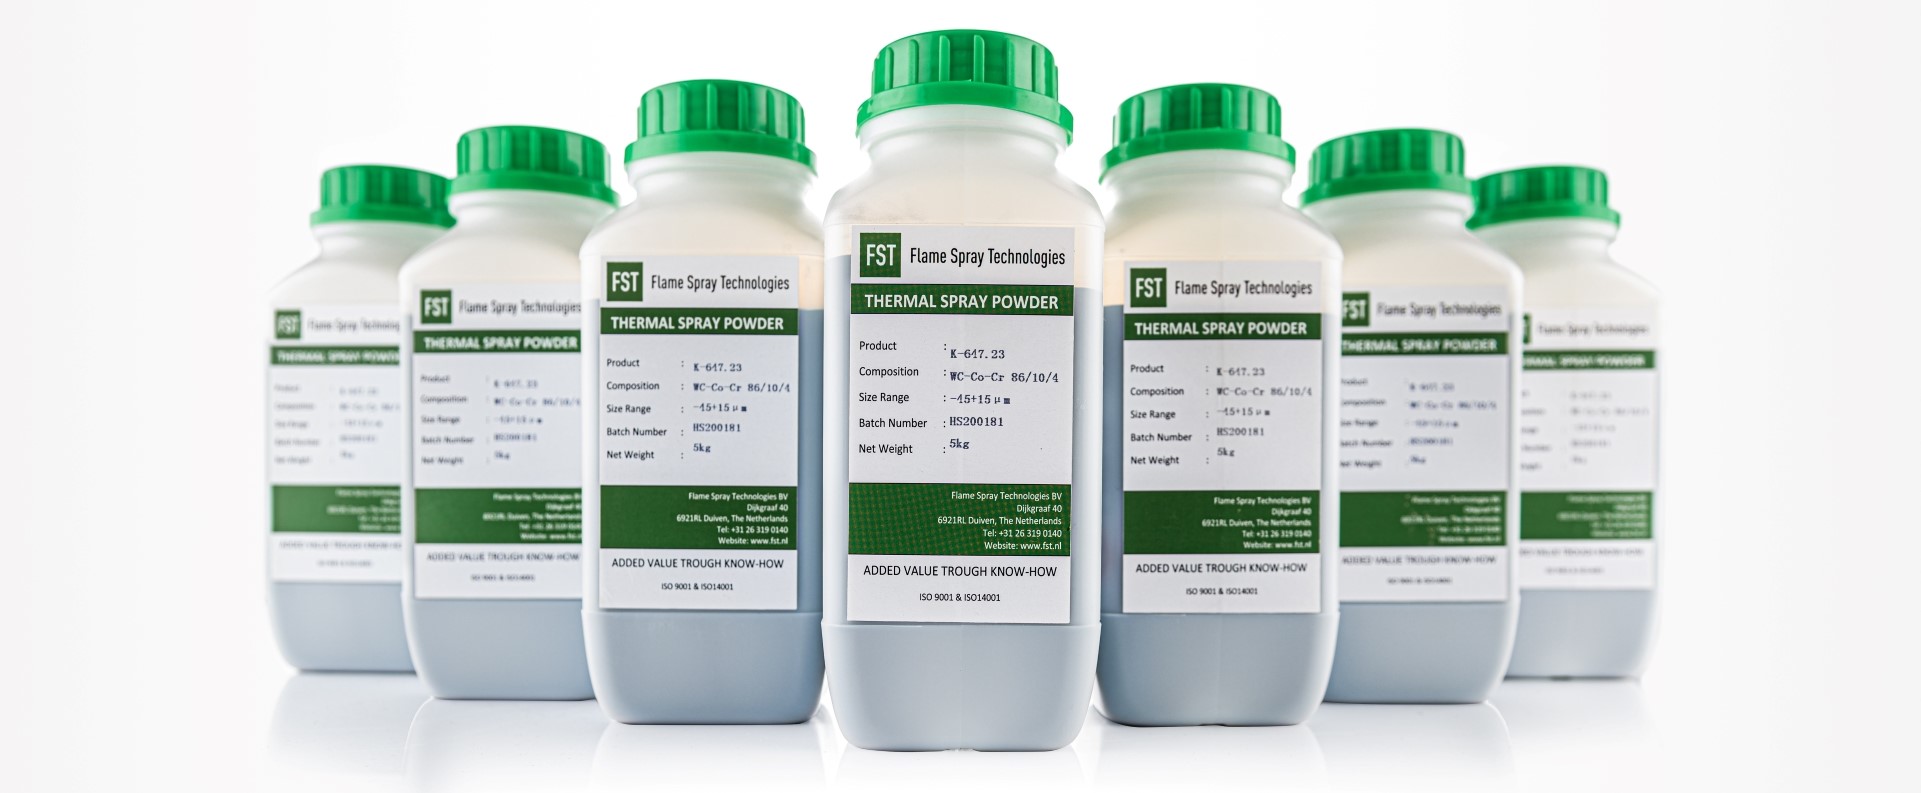 First class Thermal<br>spray powders